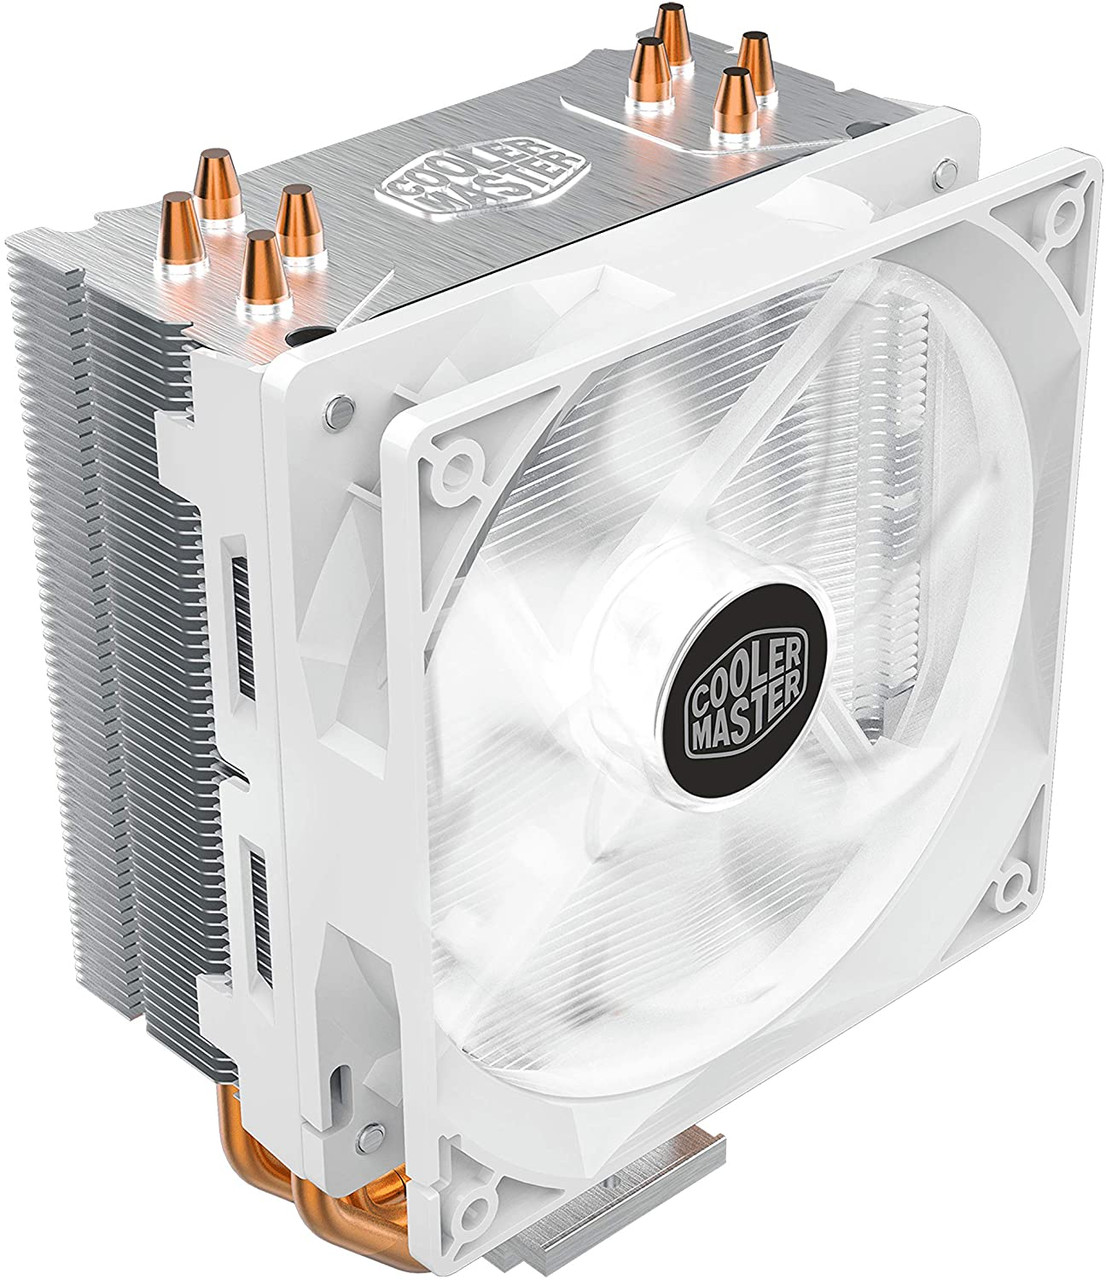 Cooler Master Hyper 212 LED Turbo ARGB CPU Air Cooler - Jet Black Aluminium  Finish, 4 Continuous Direct Contact Heat Pipes with Fins, Dual SickleFlow